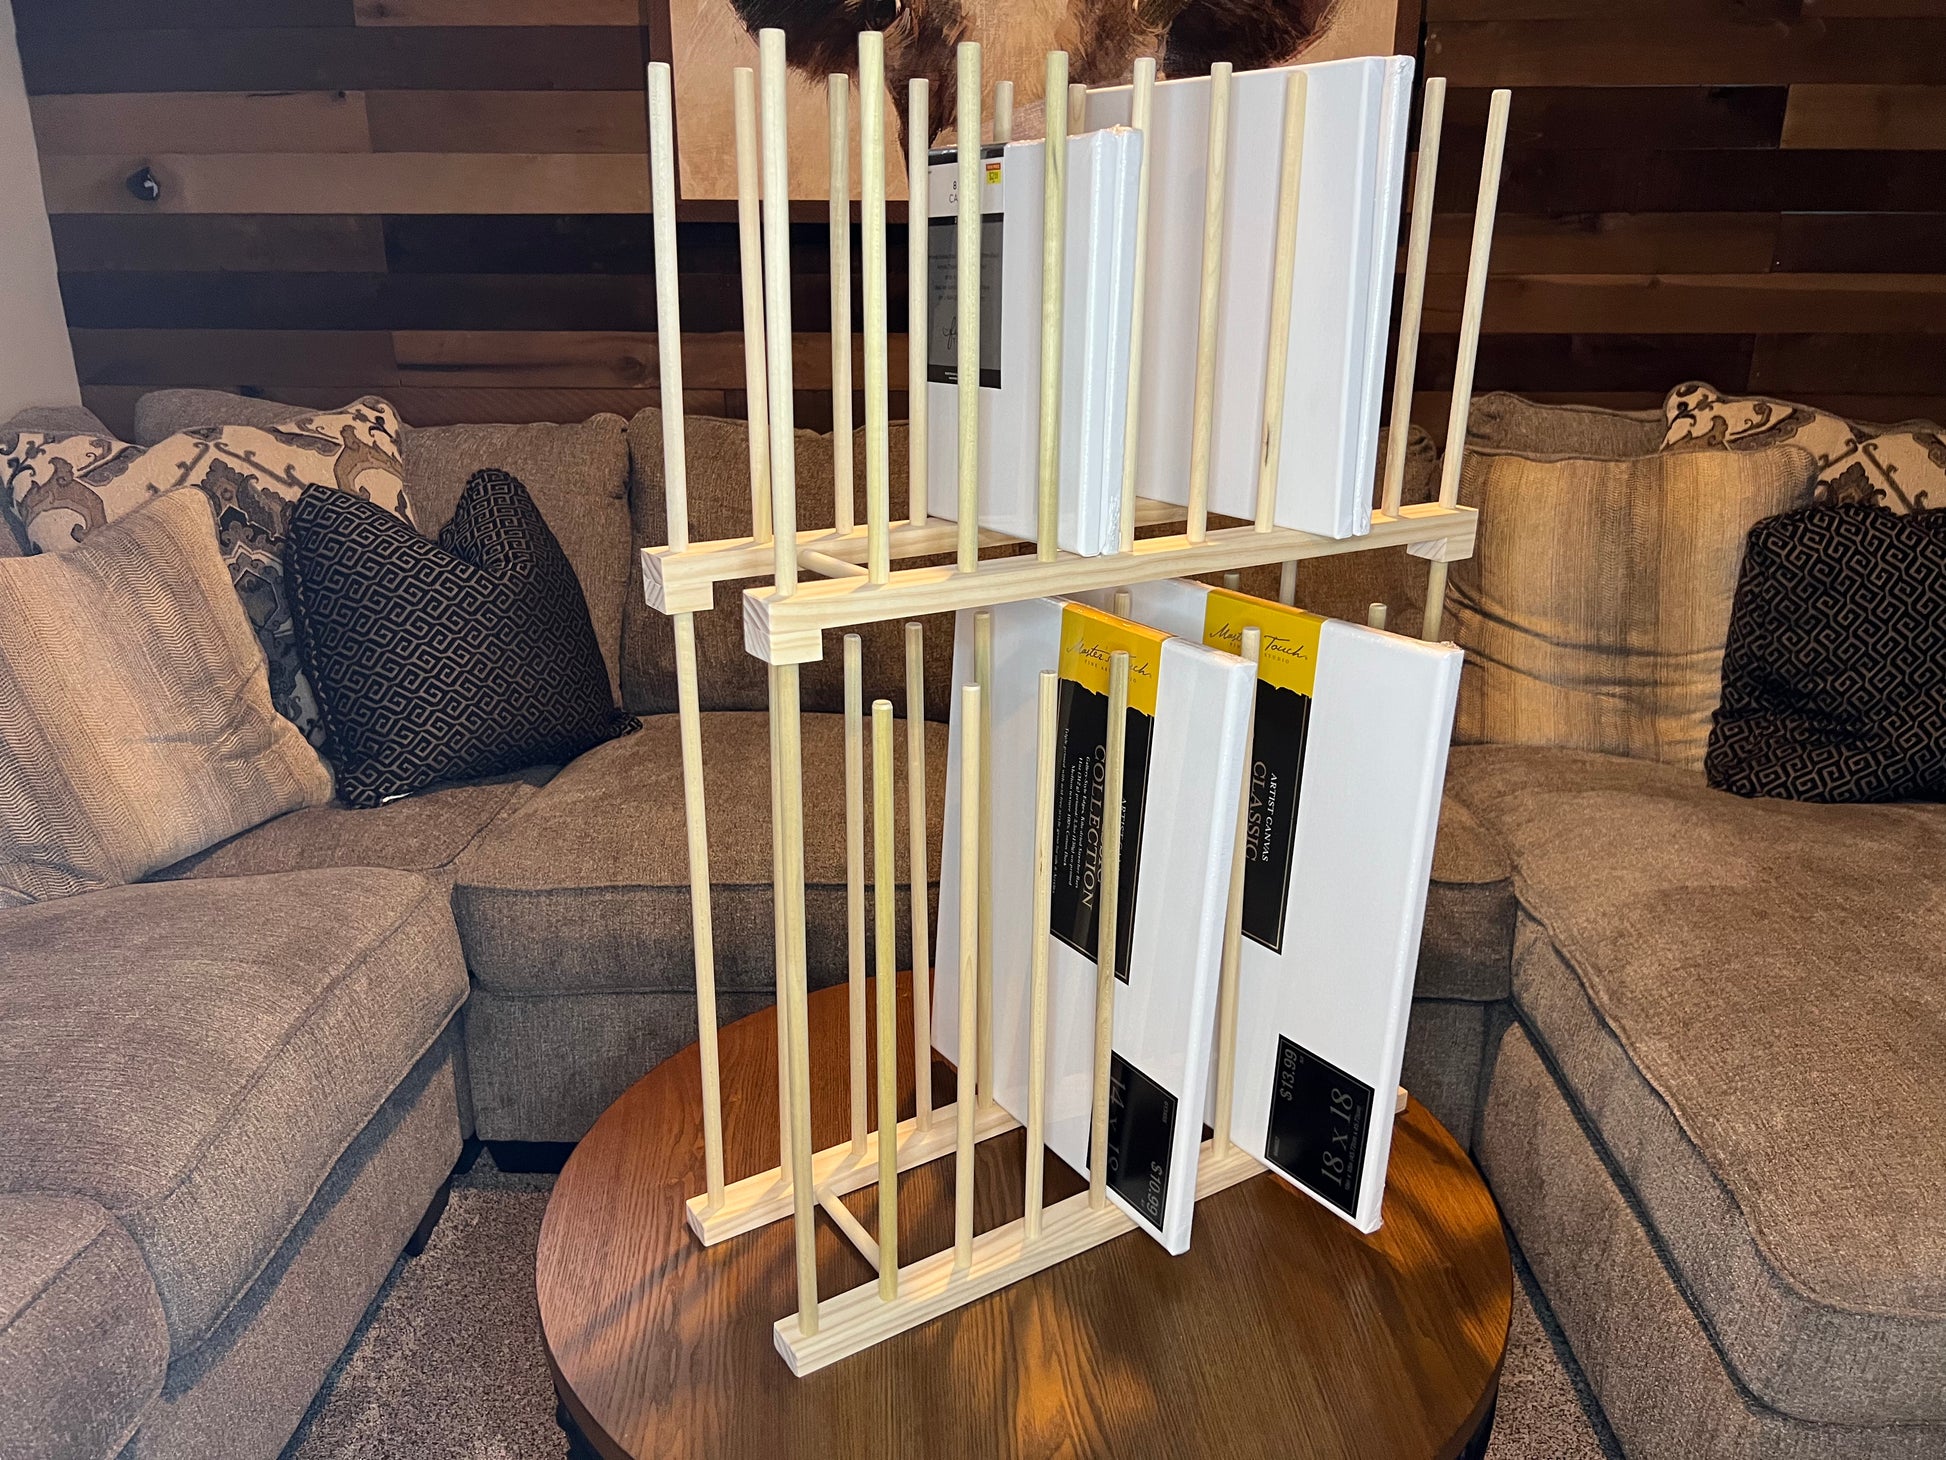 Small Two Tier Art Storage Rack - 24 long x 8 wide